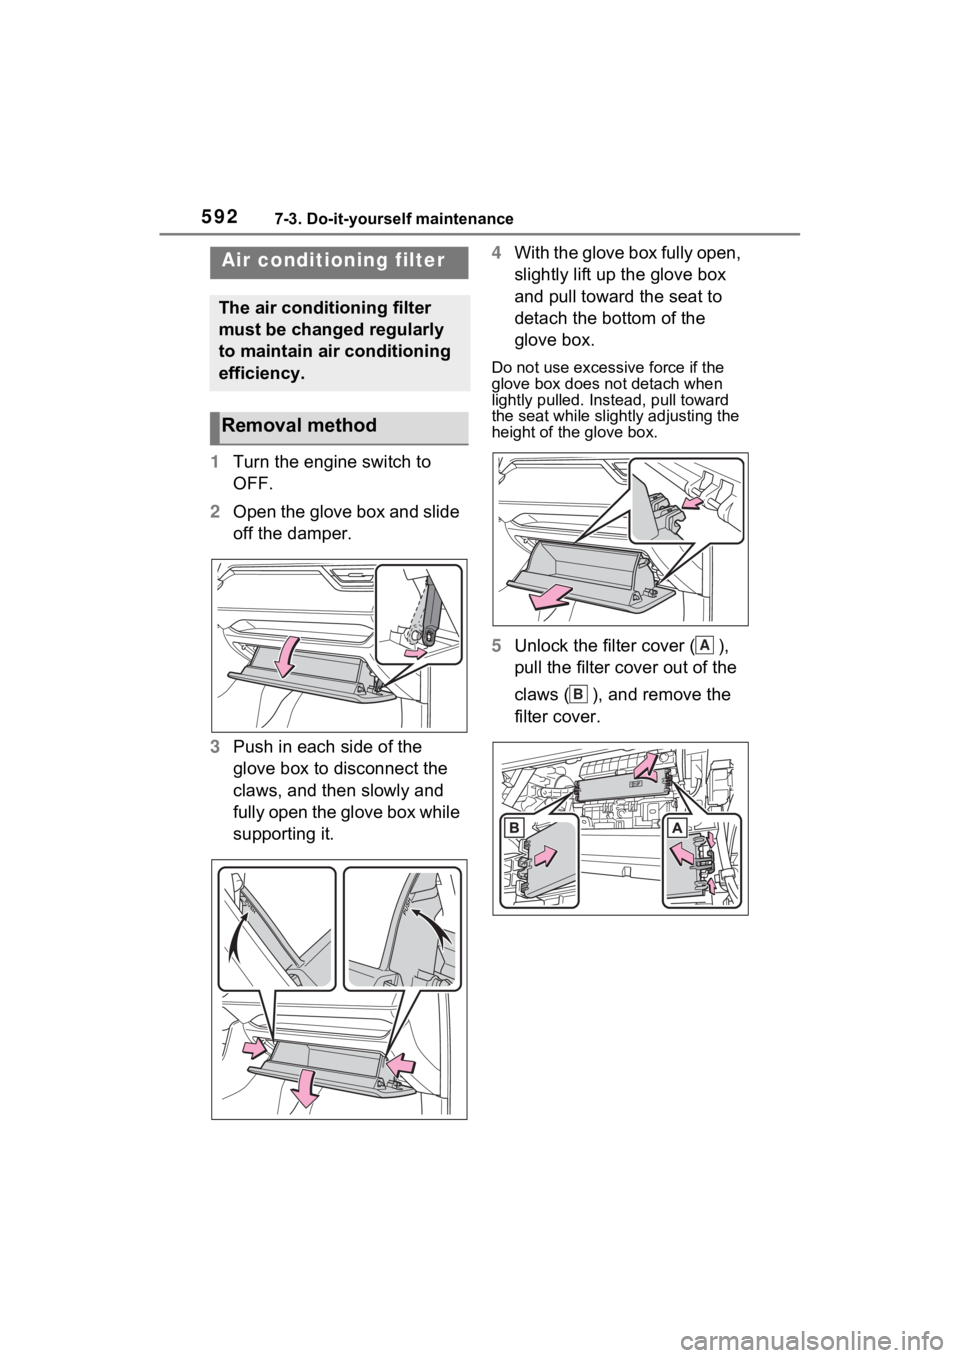 TOYOTA RAV4 2022  Owners Manual 5927-3. Do-it-yourself maintenance
1Turn the engine switch to 
OFF.
2 Open the glove box and slide 
off the damper.
3 Push in each side of the 
glove box to disconnect the 
claws, and then slowly and 